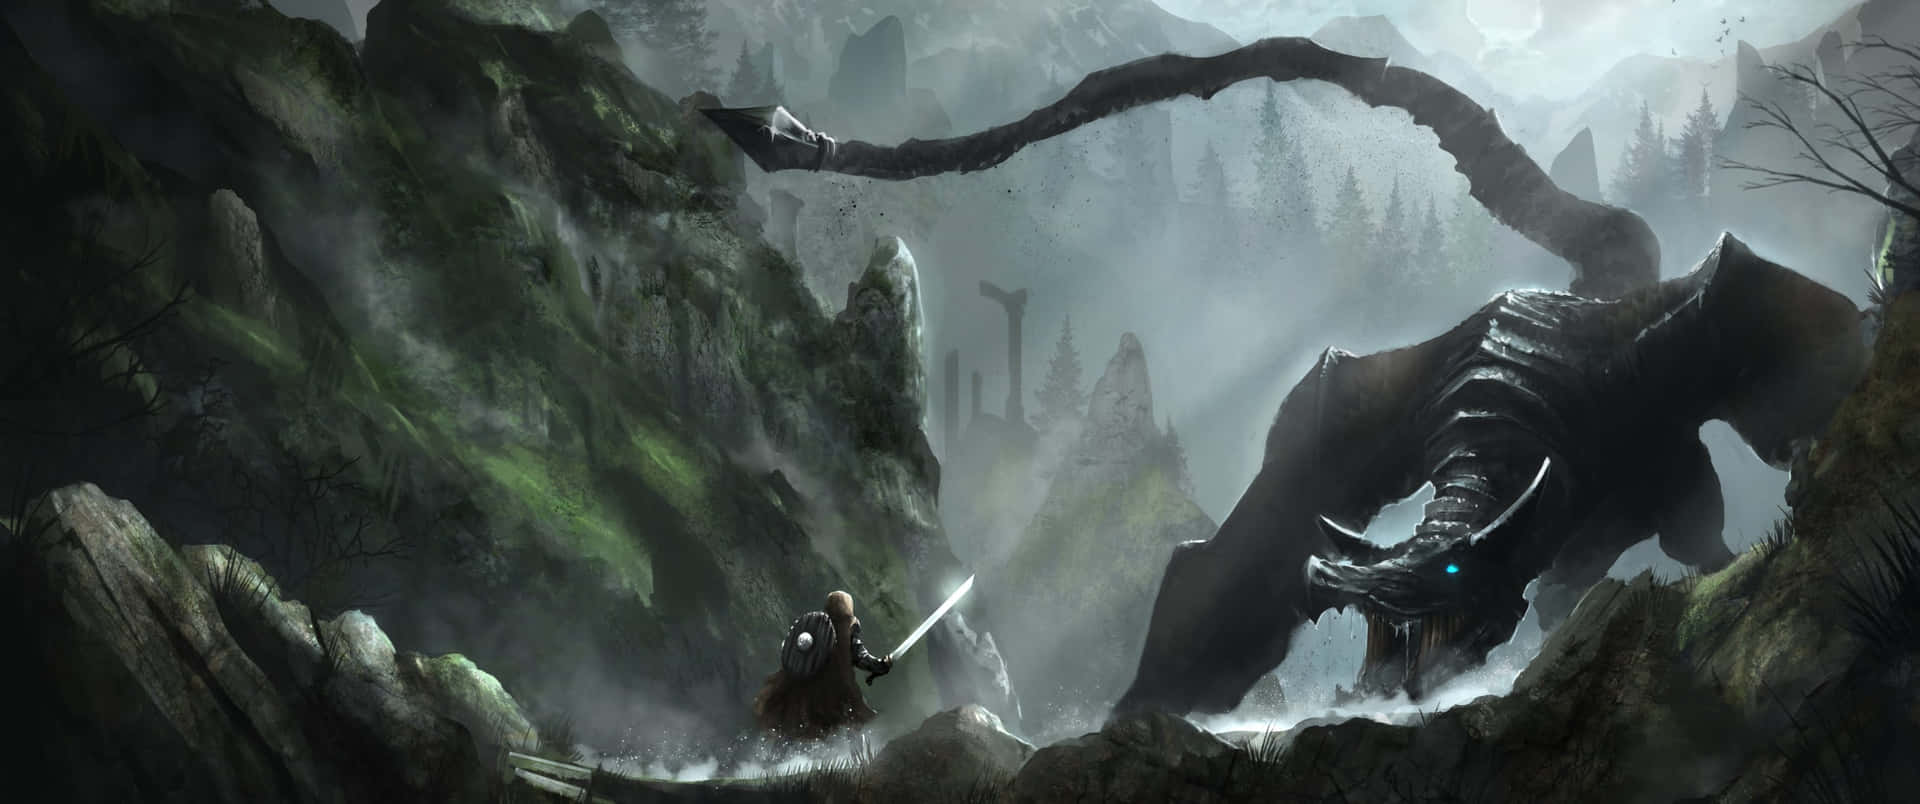 Step into the heart of the world of The Elder Scrolls V Skyrim